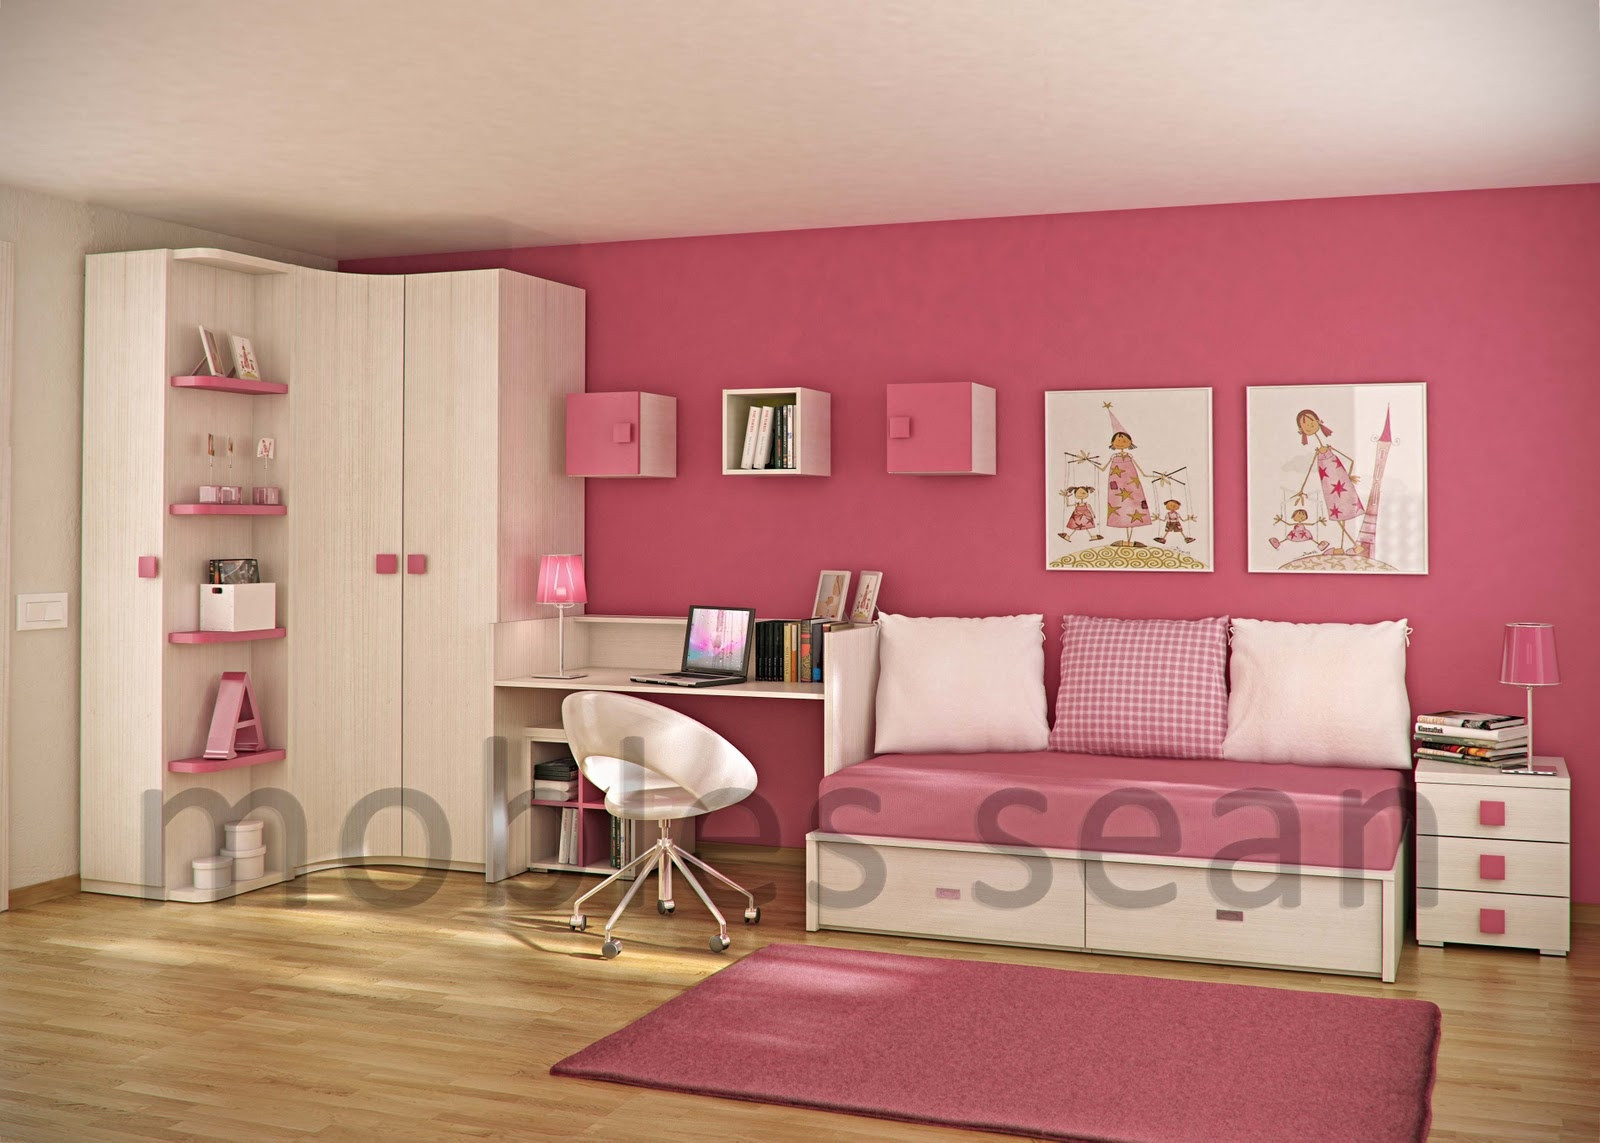 Kids Room Interior
 Space Saving Designs for Small Kids Rooms